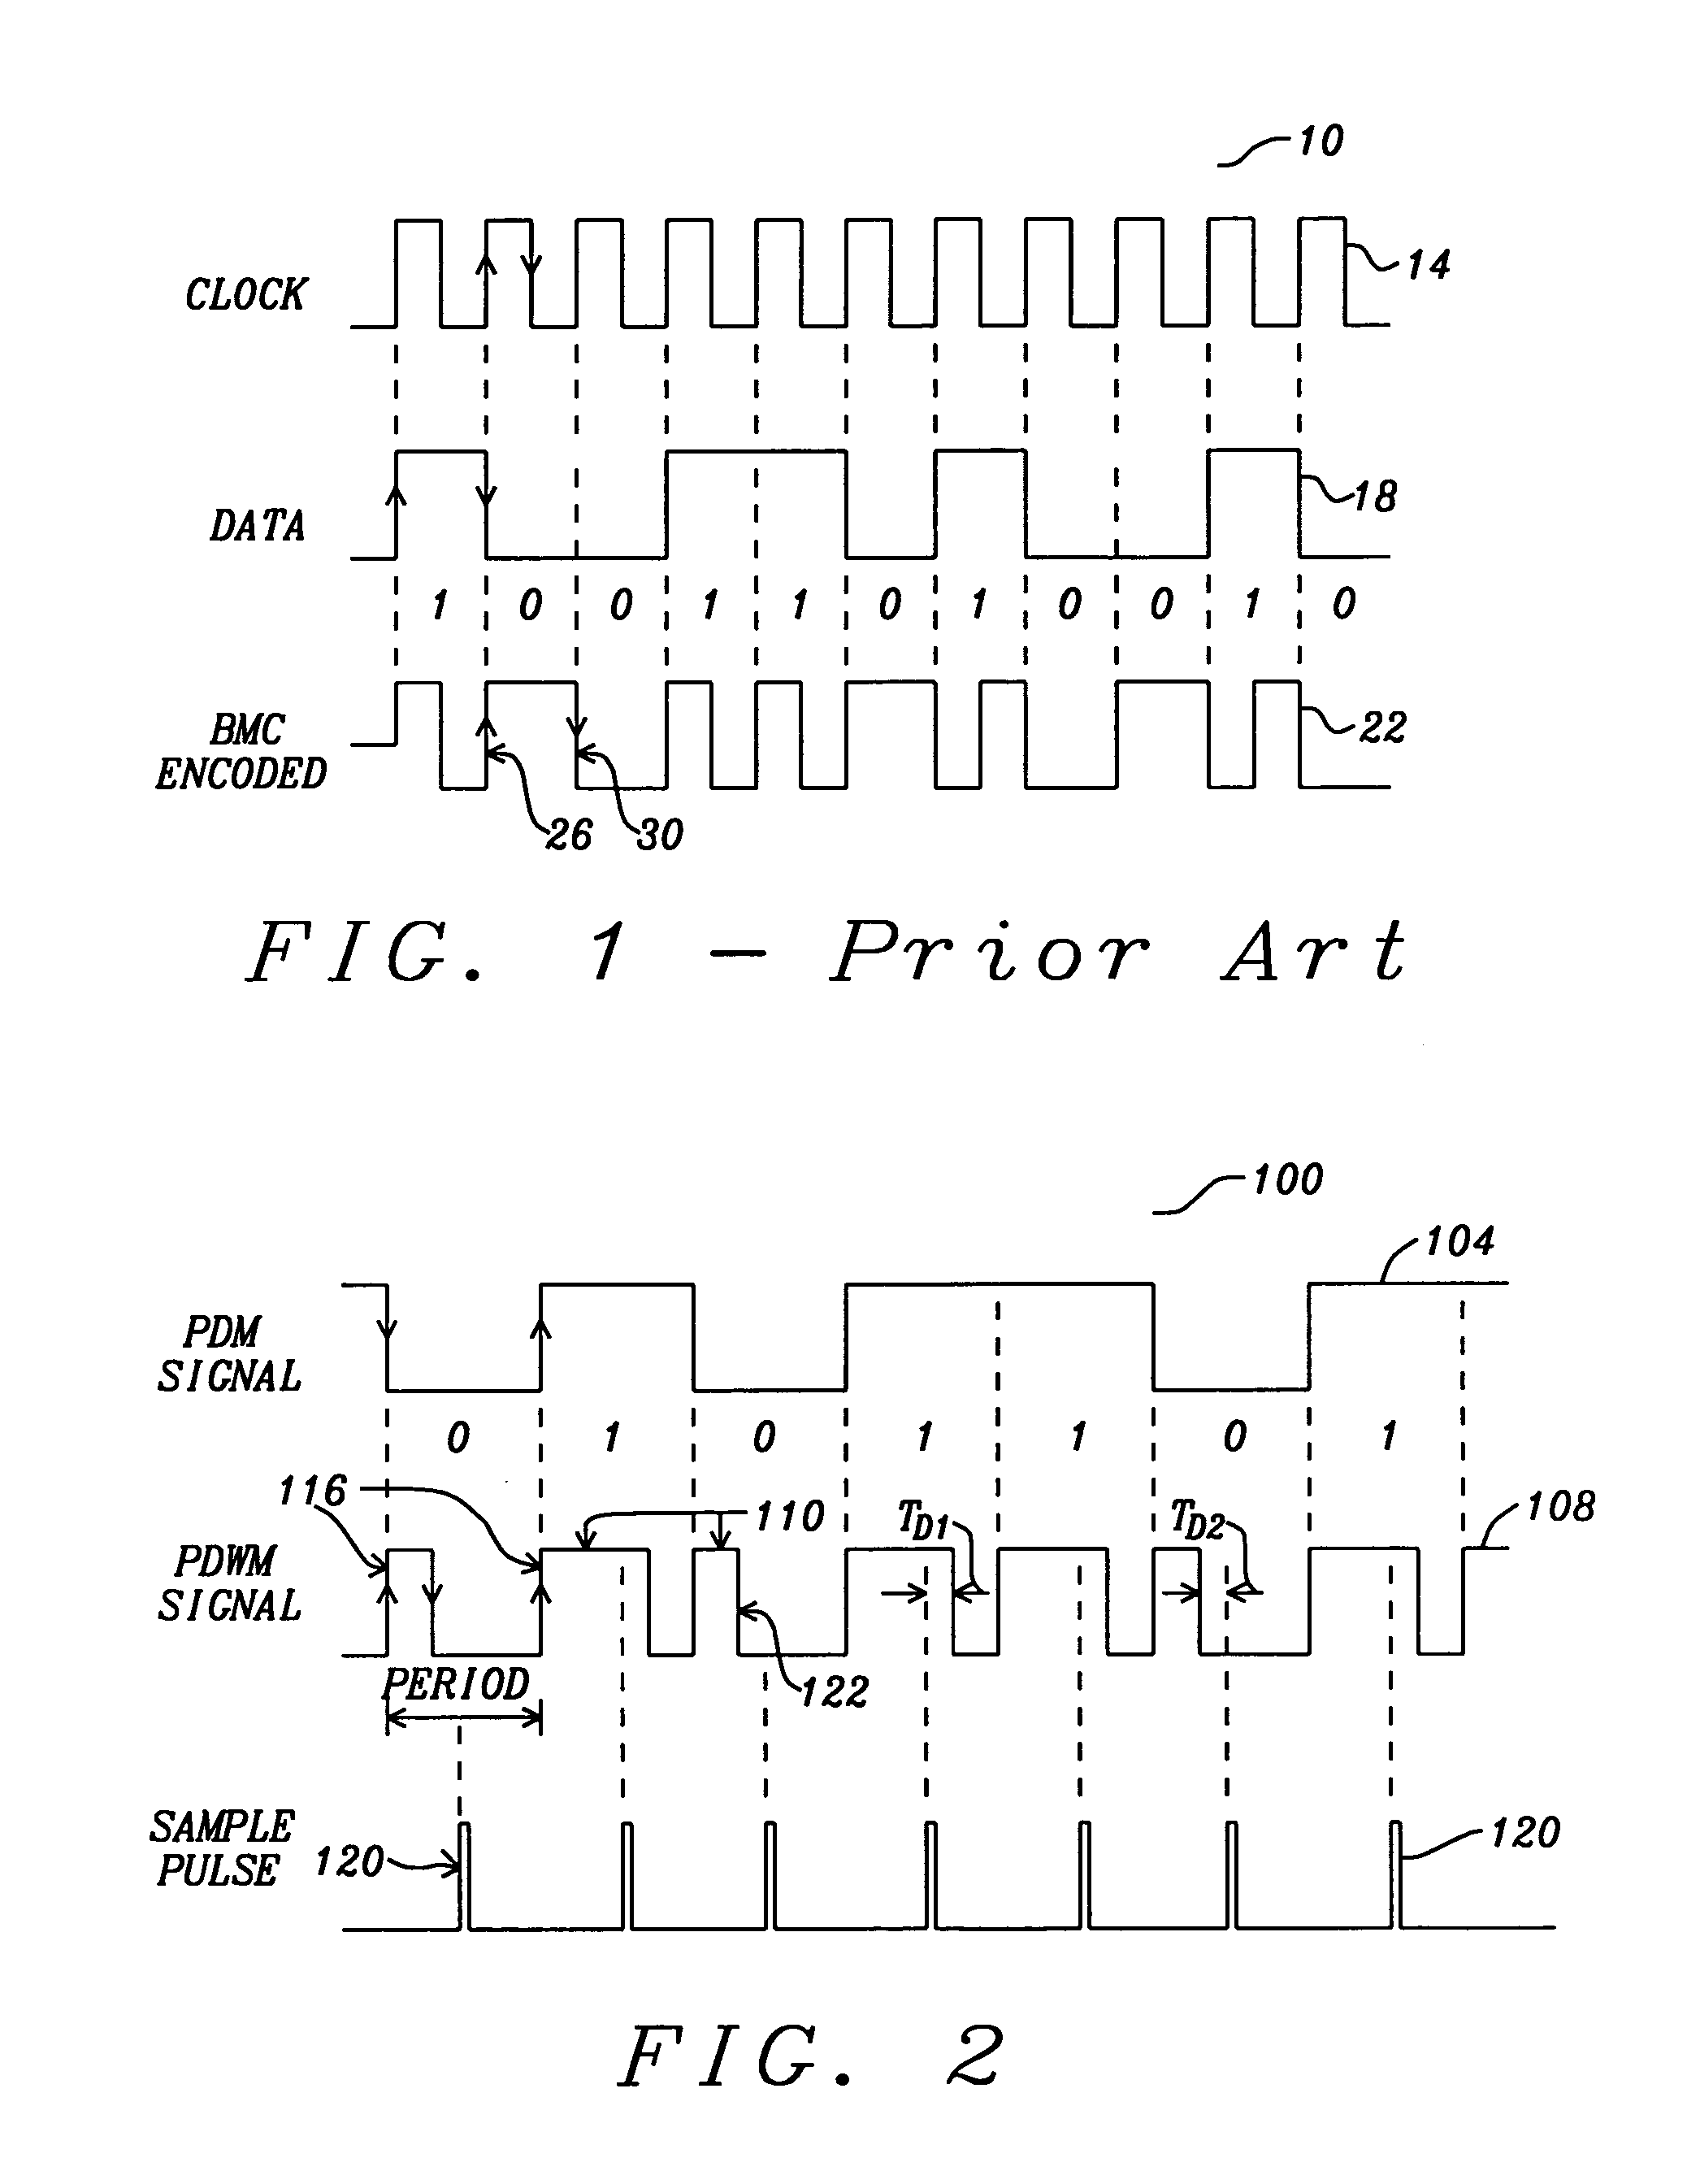 Device and method for the transmission and reception of high fidelity audio using a single wire